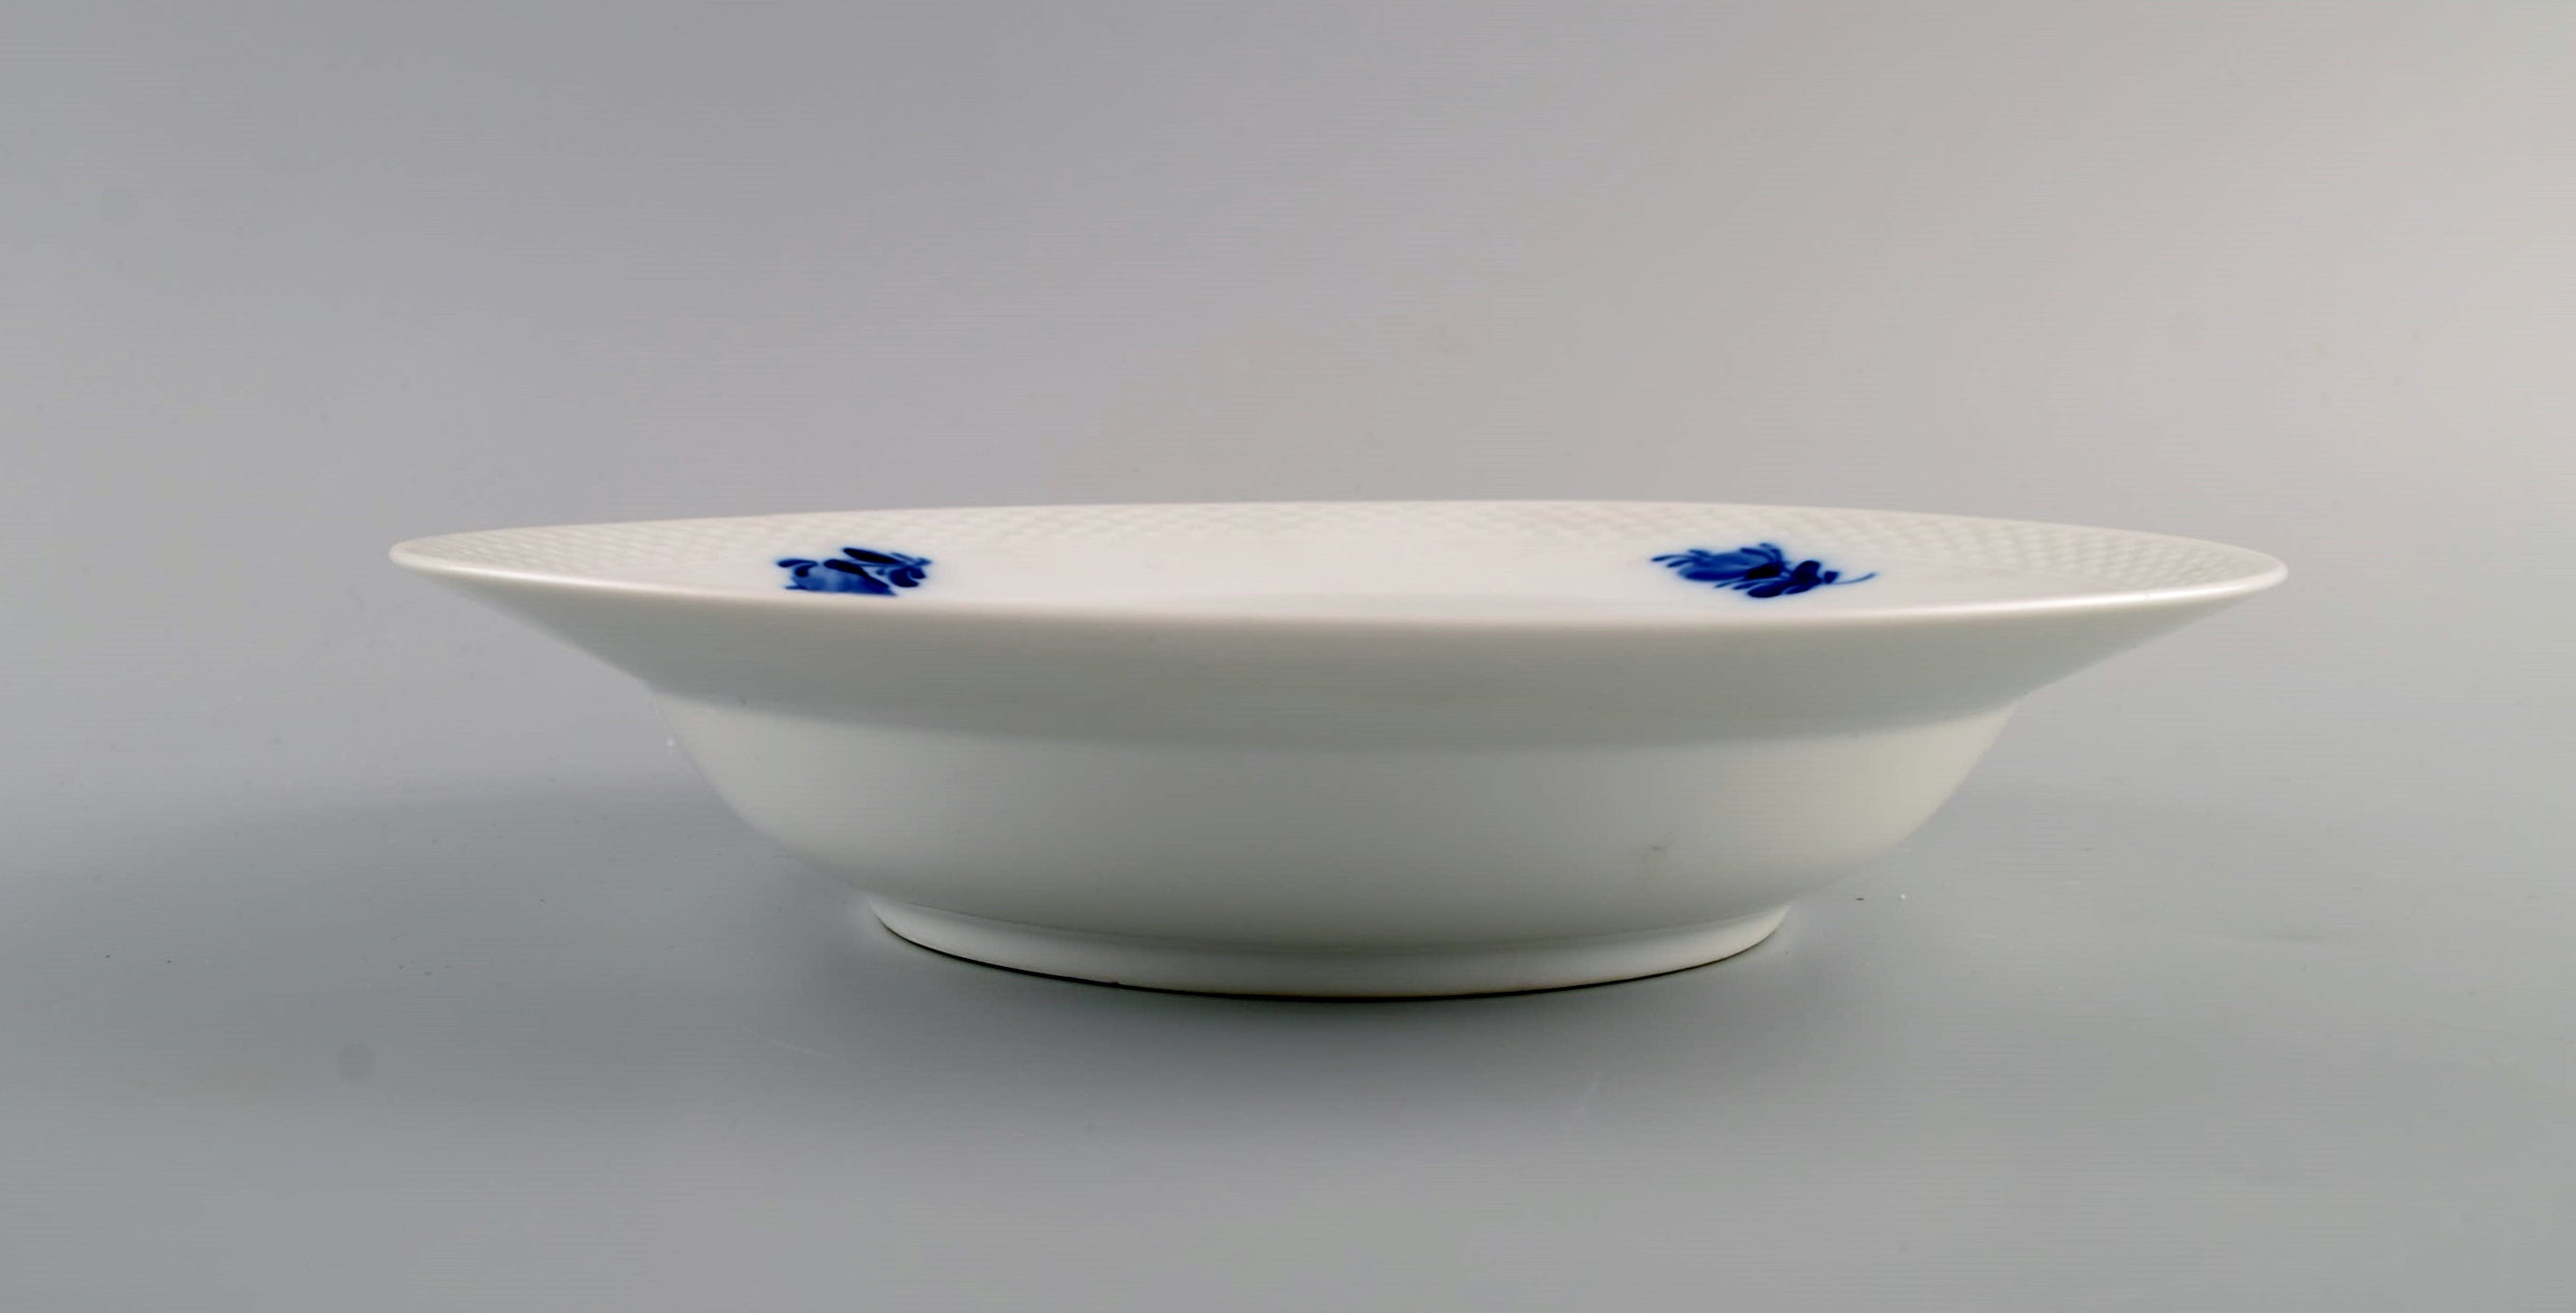  Royal Copenhagen Blue Flower Braided lunch plate. Model  number 10/8096. Early 20th century. *